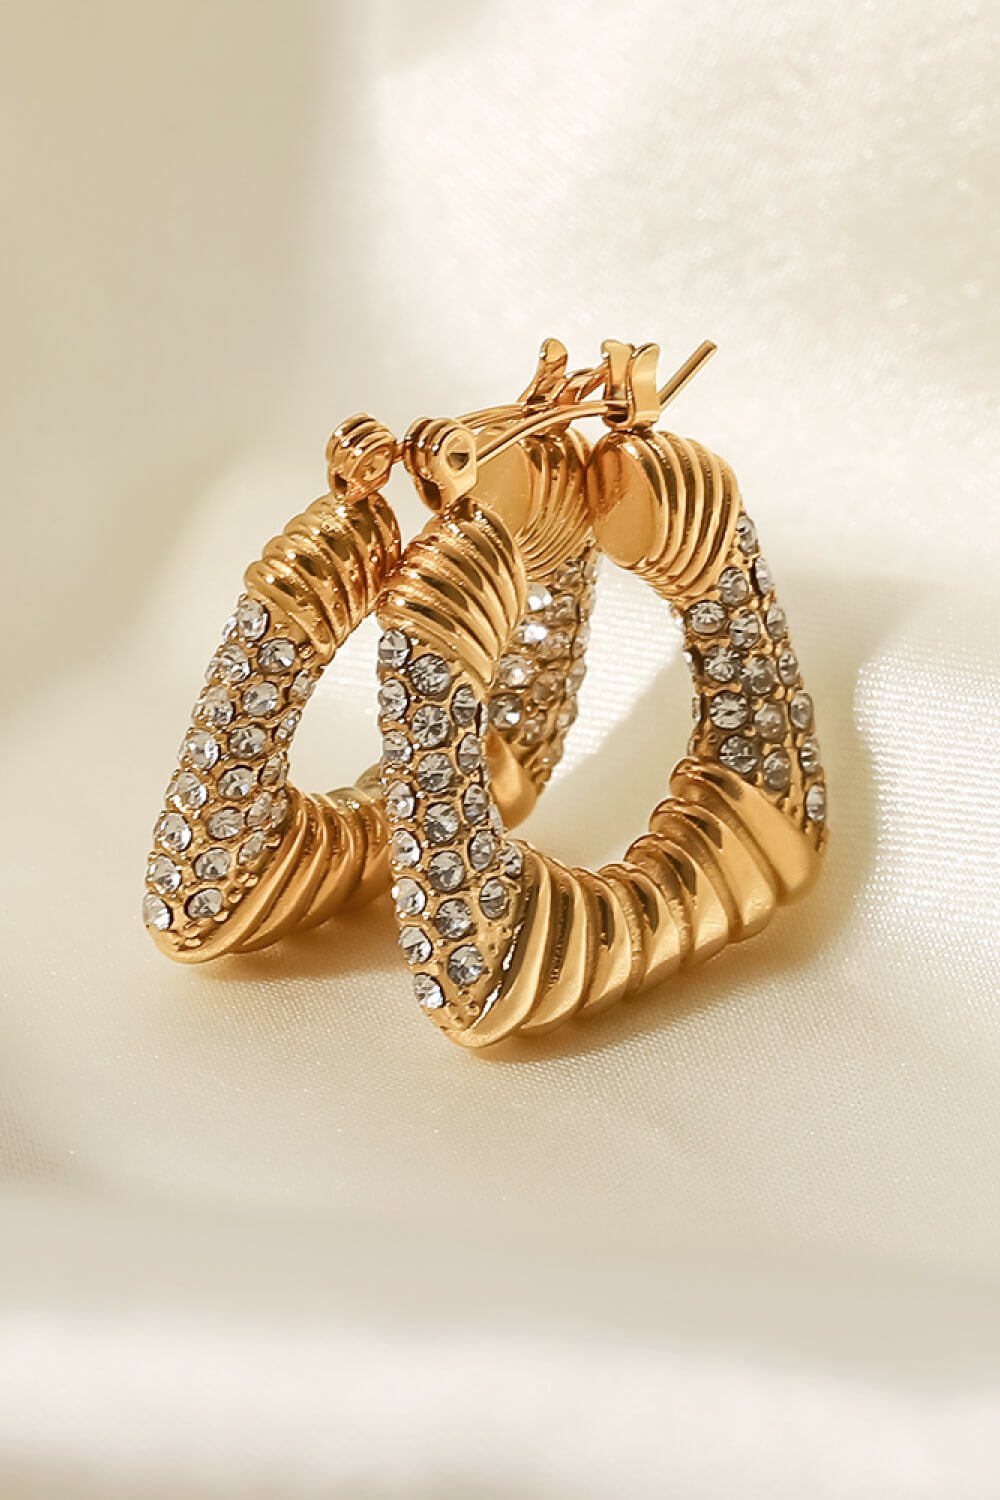 18K Gold Plated Inlaid Cubic Zirconia Earrings - Uylee's Boutique